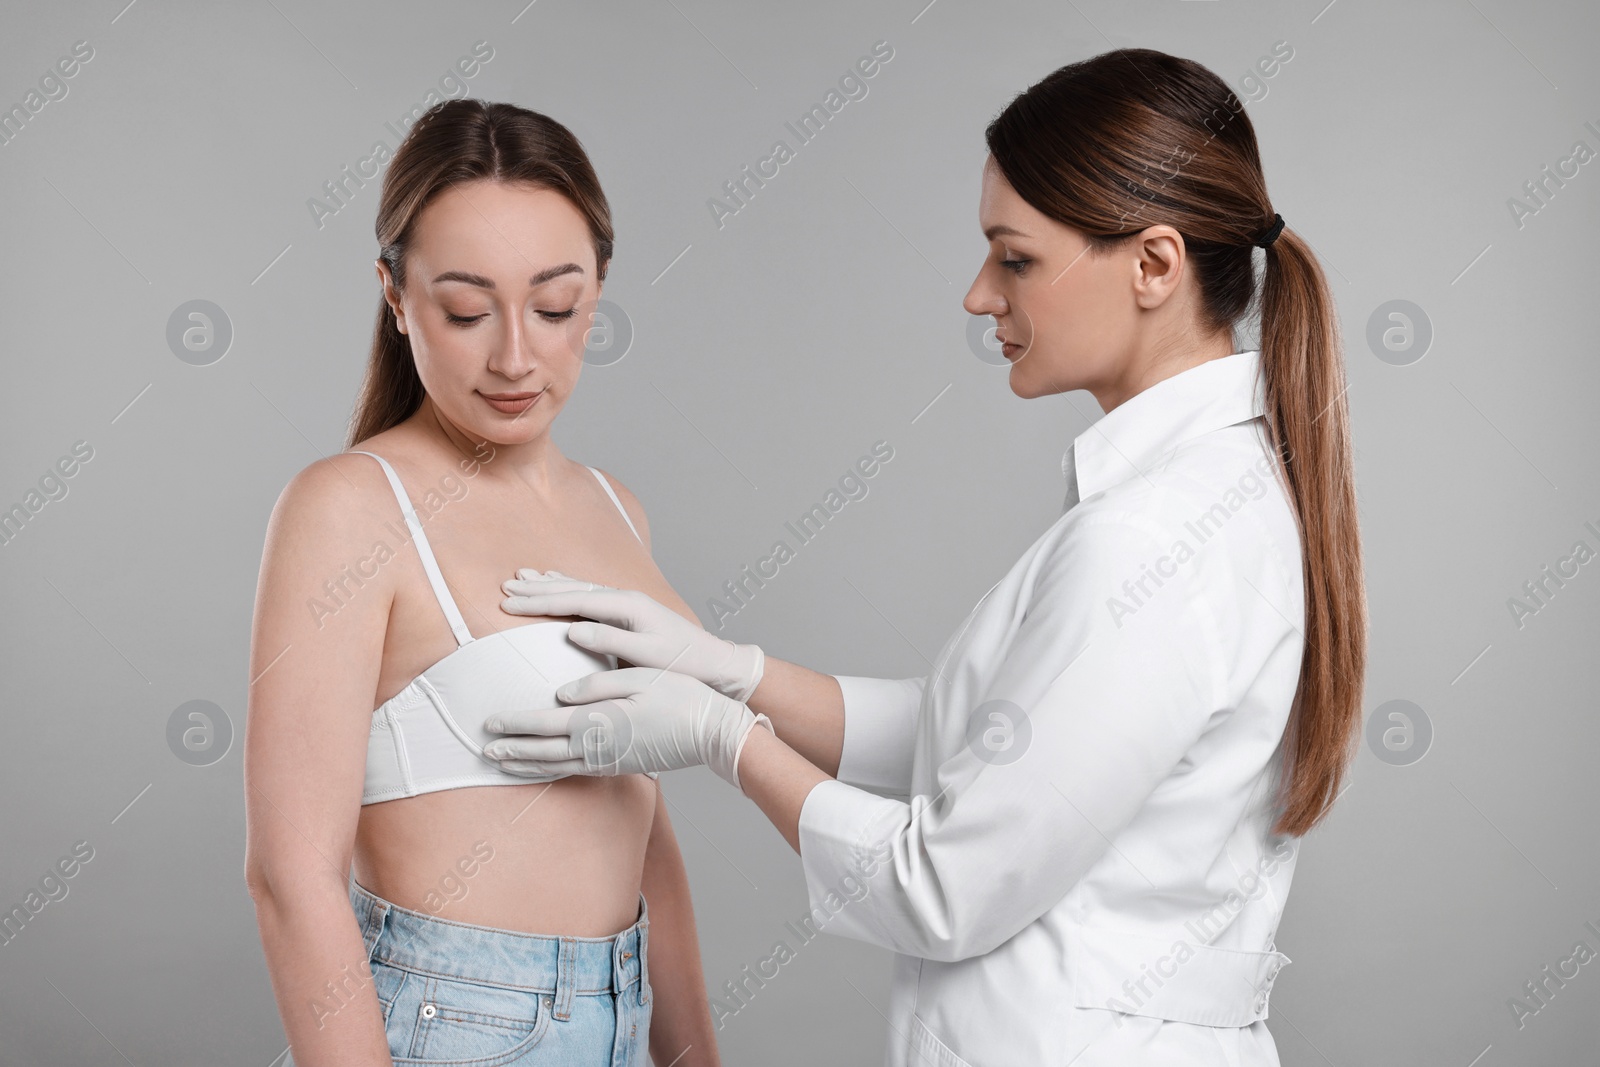 Photo of Mammologist checking woman's breast on gray background